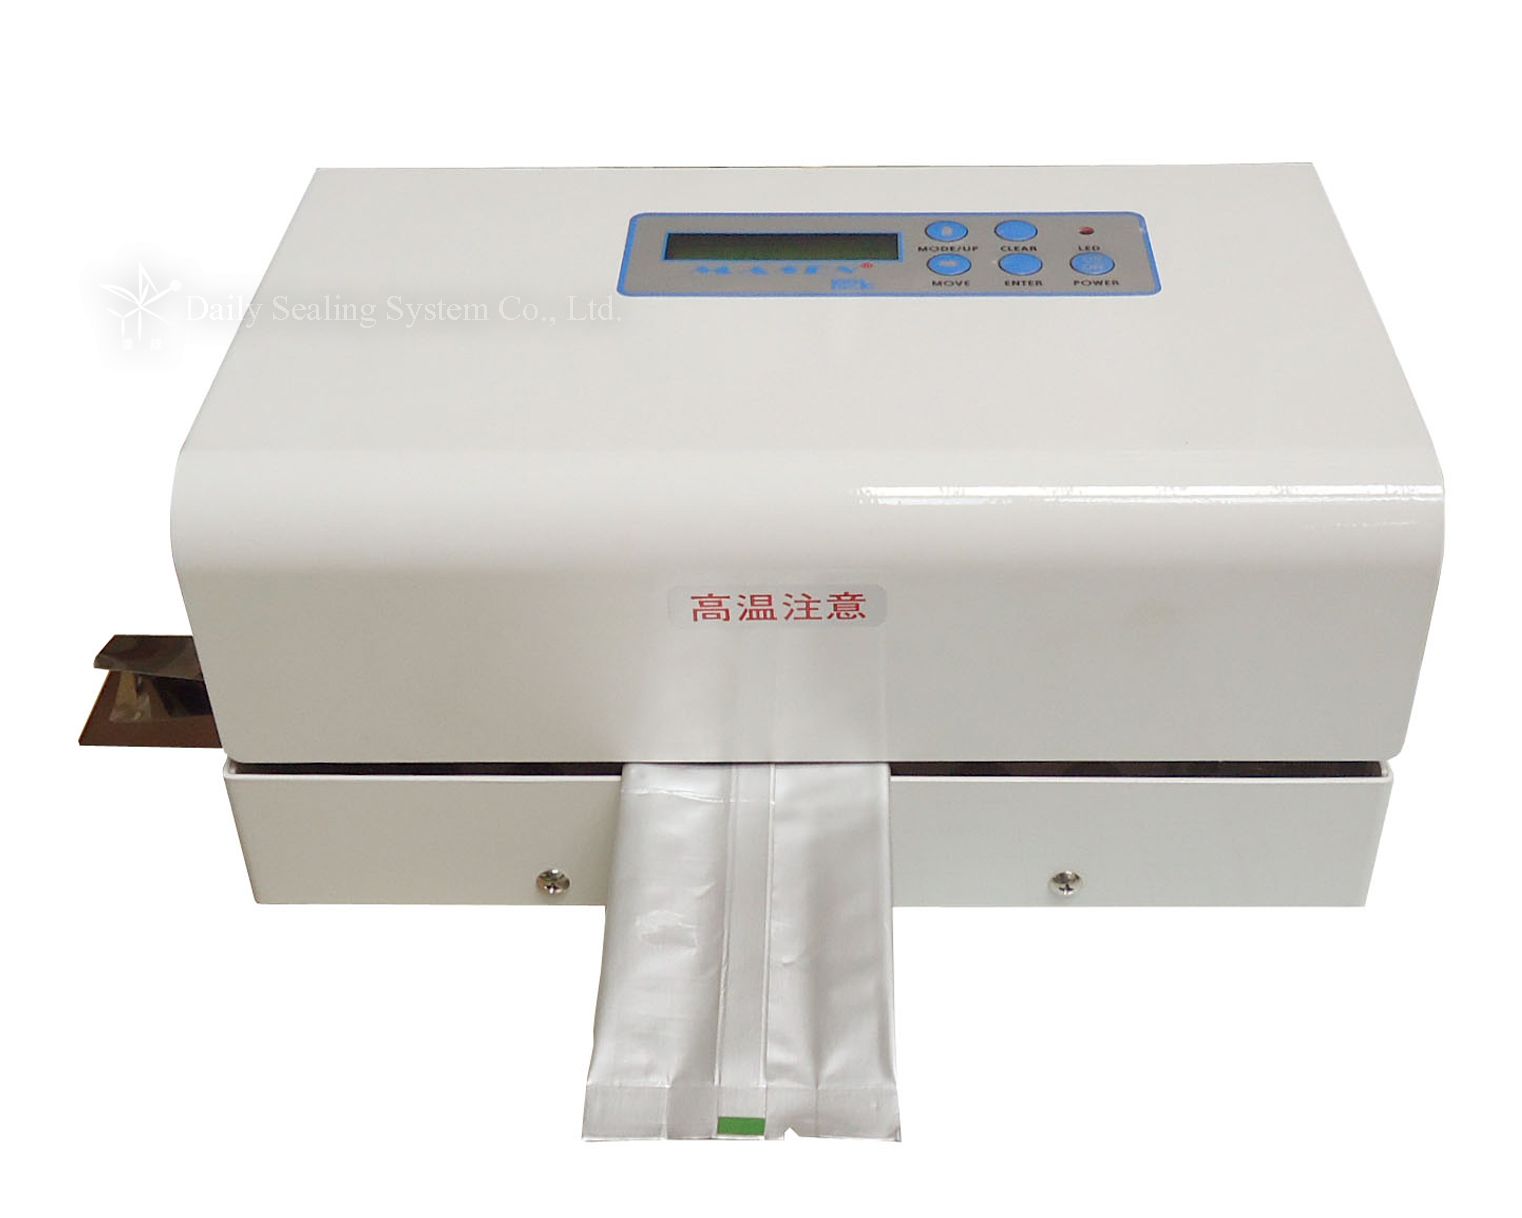 370W Commercial Chamber Vacuum Sealer Food Saver Sealing Packing Machine  110V US